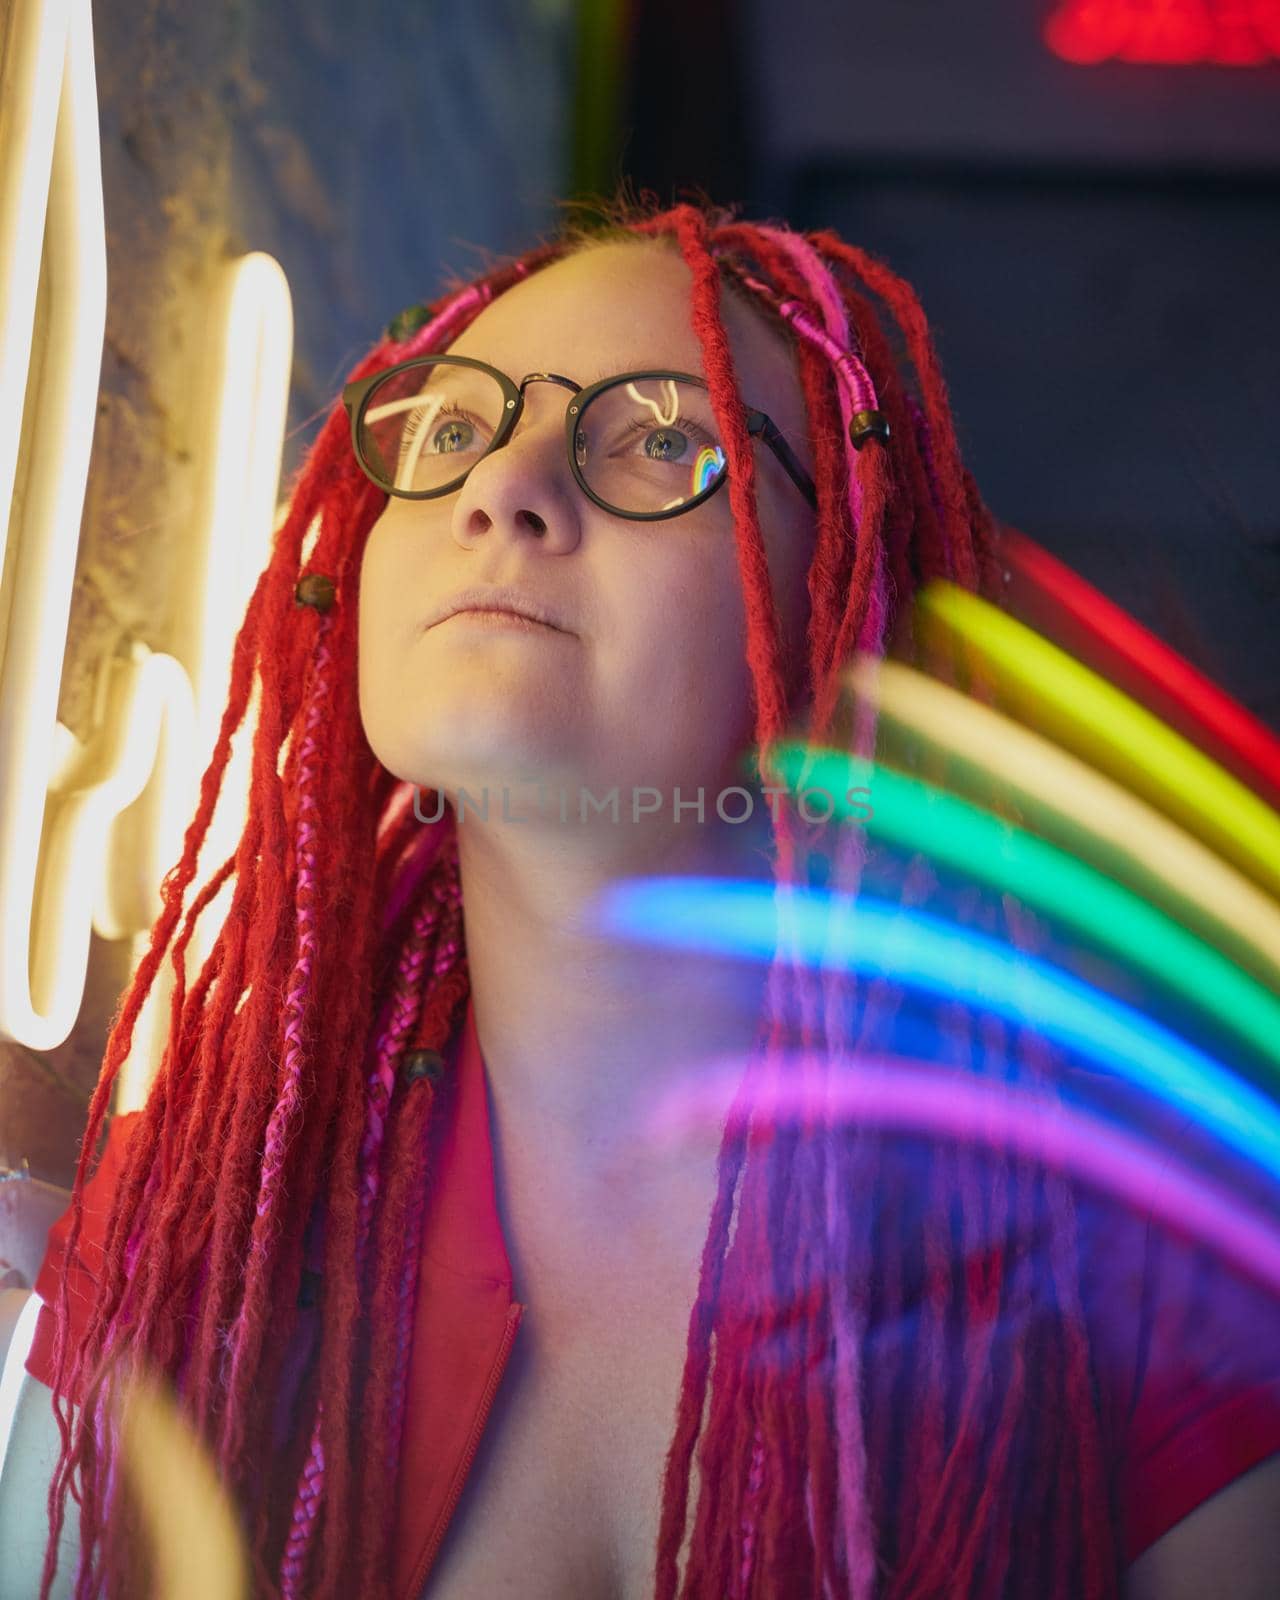 Girl in neon lights at party in nightclub, beautiful woman in sunglasses, with long pink hair, with dreadlocks pigtails, bright and stylish in the glow of neon signs